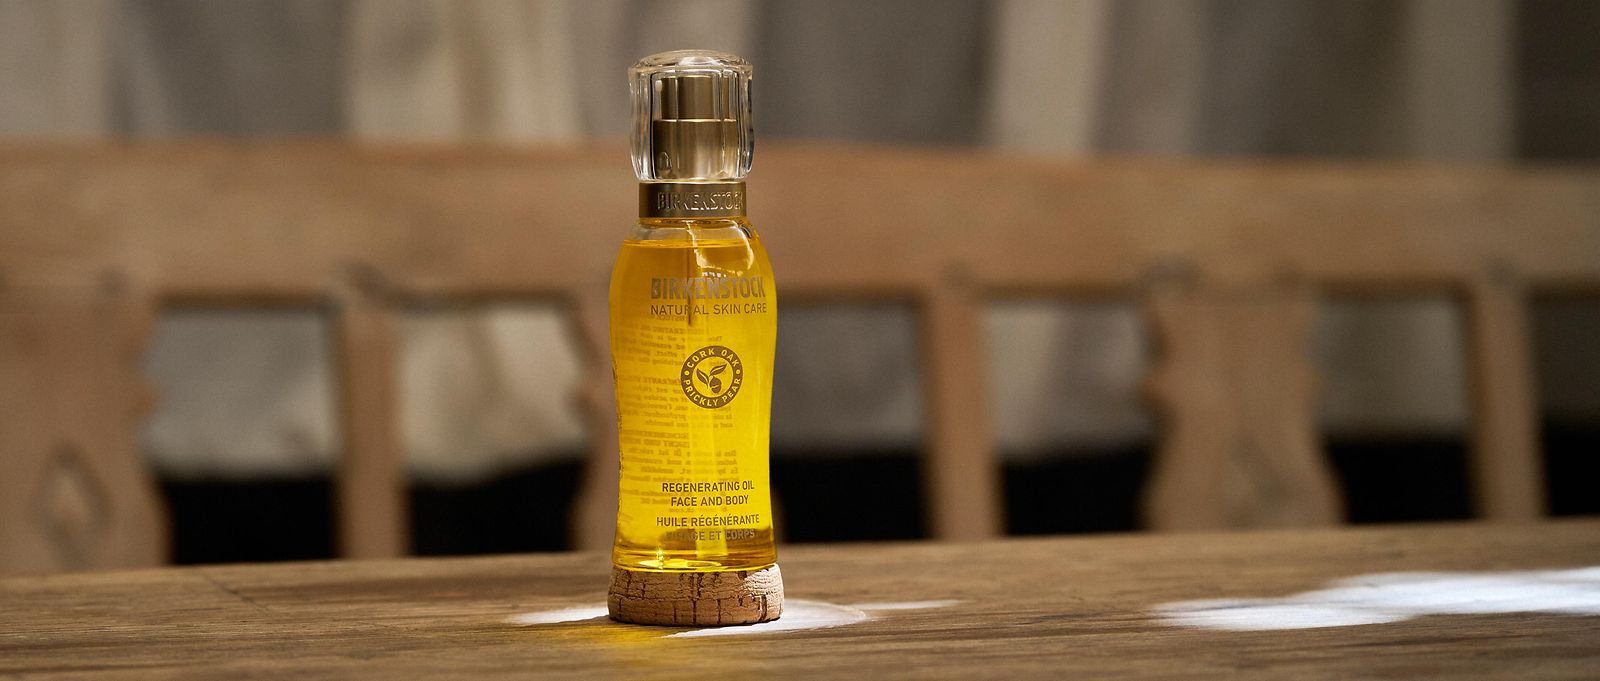 Cosmetics Face and Body Oil